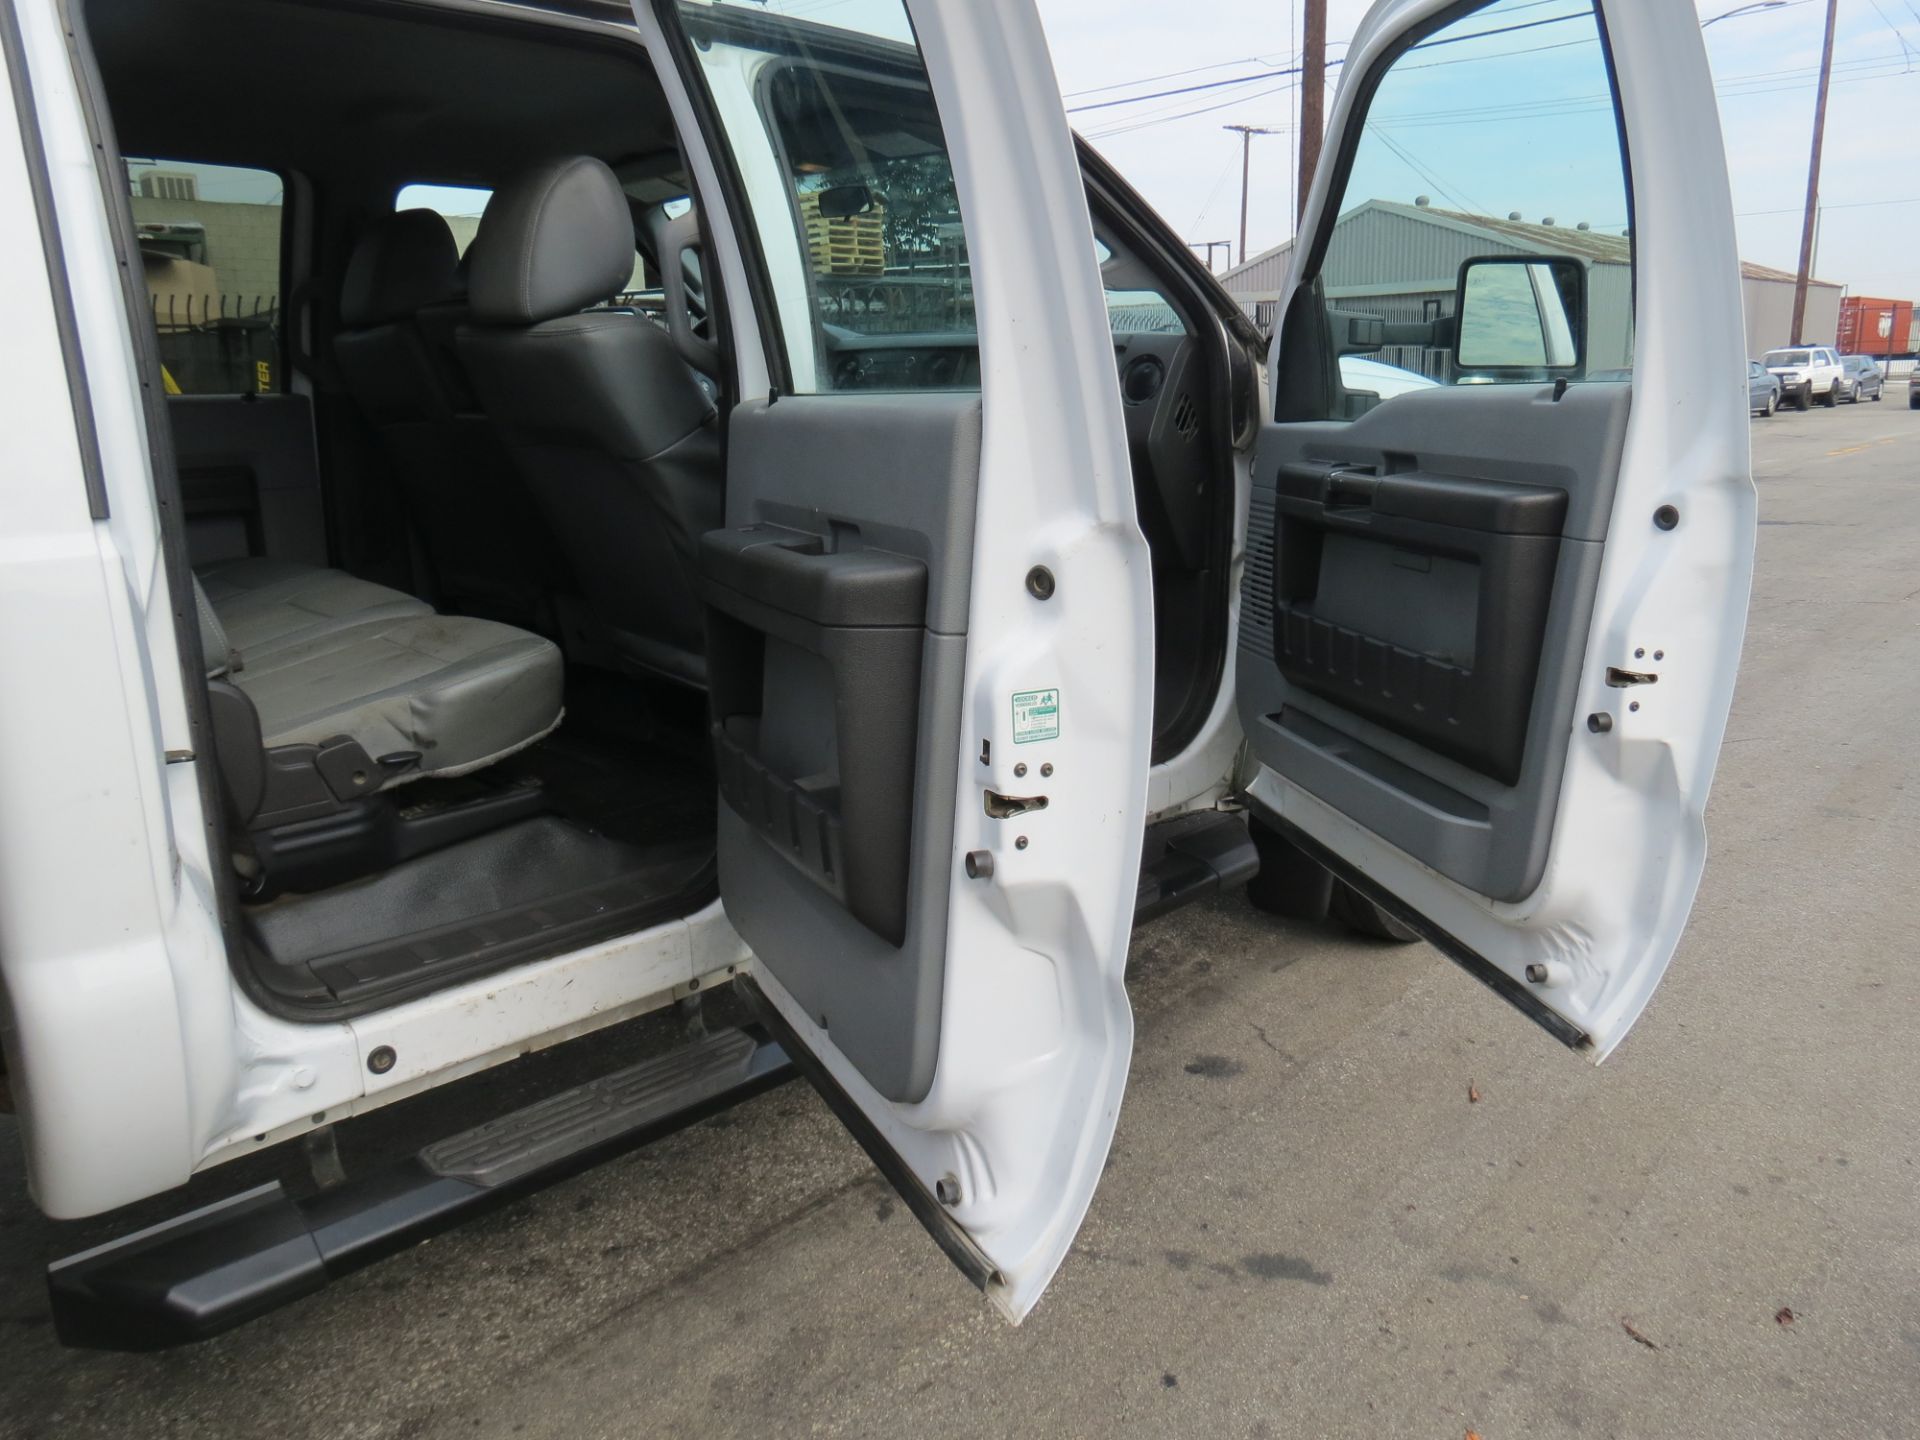 2015 Ford F-450 SUPER DUTY STAKE BED TRUCK, WITH LIFT GATE, SUPER CREW CAB , 6.7 POWER STROKE DIESEL - Image 26 of 34